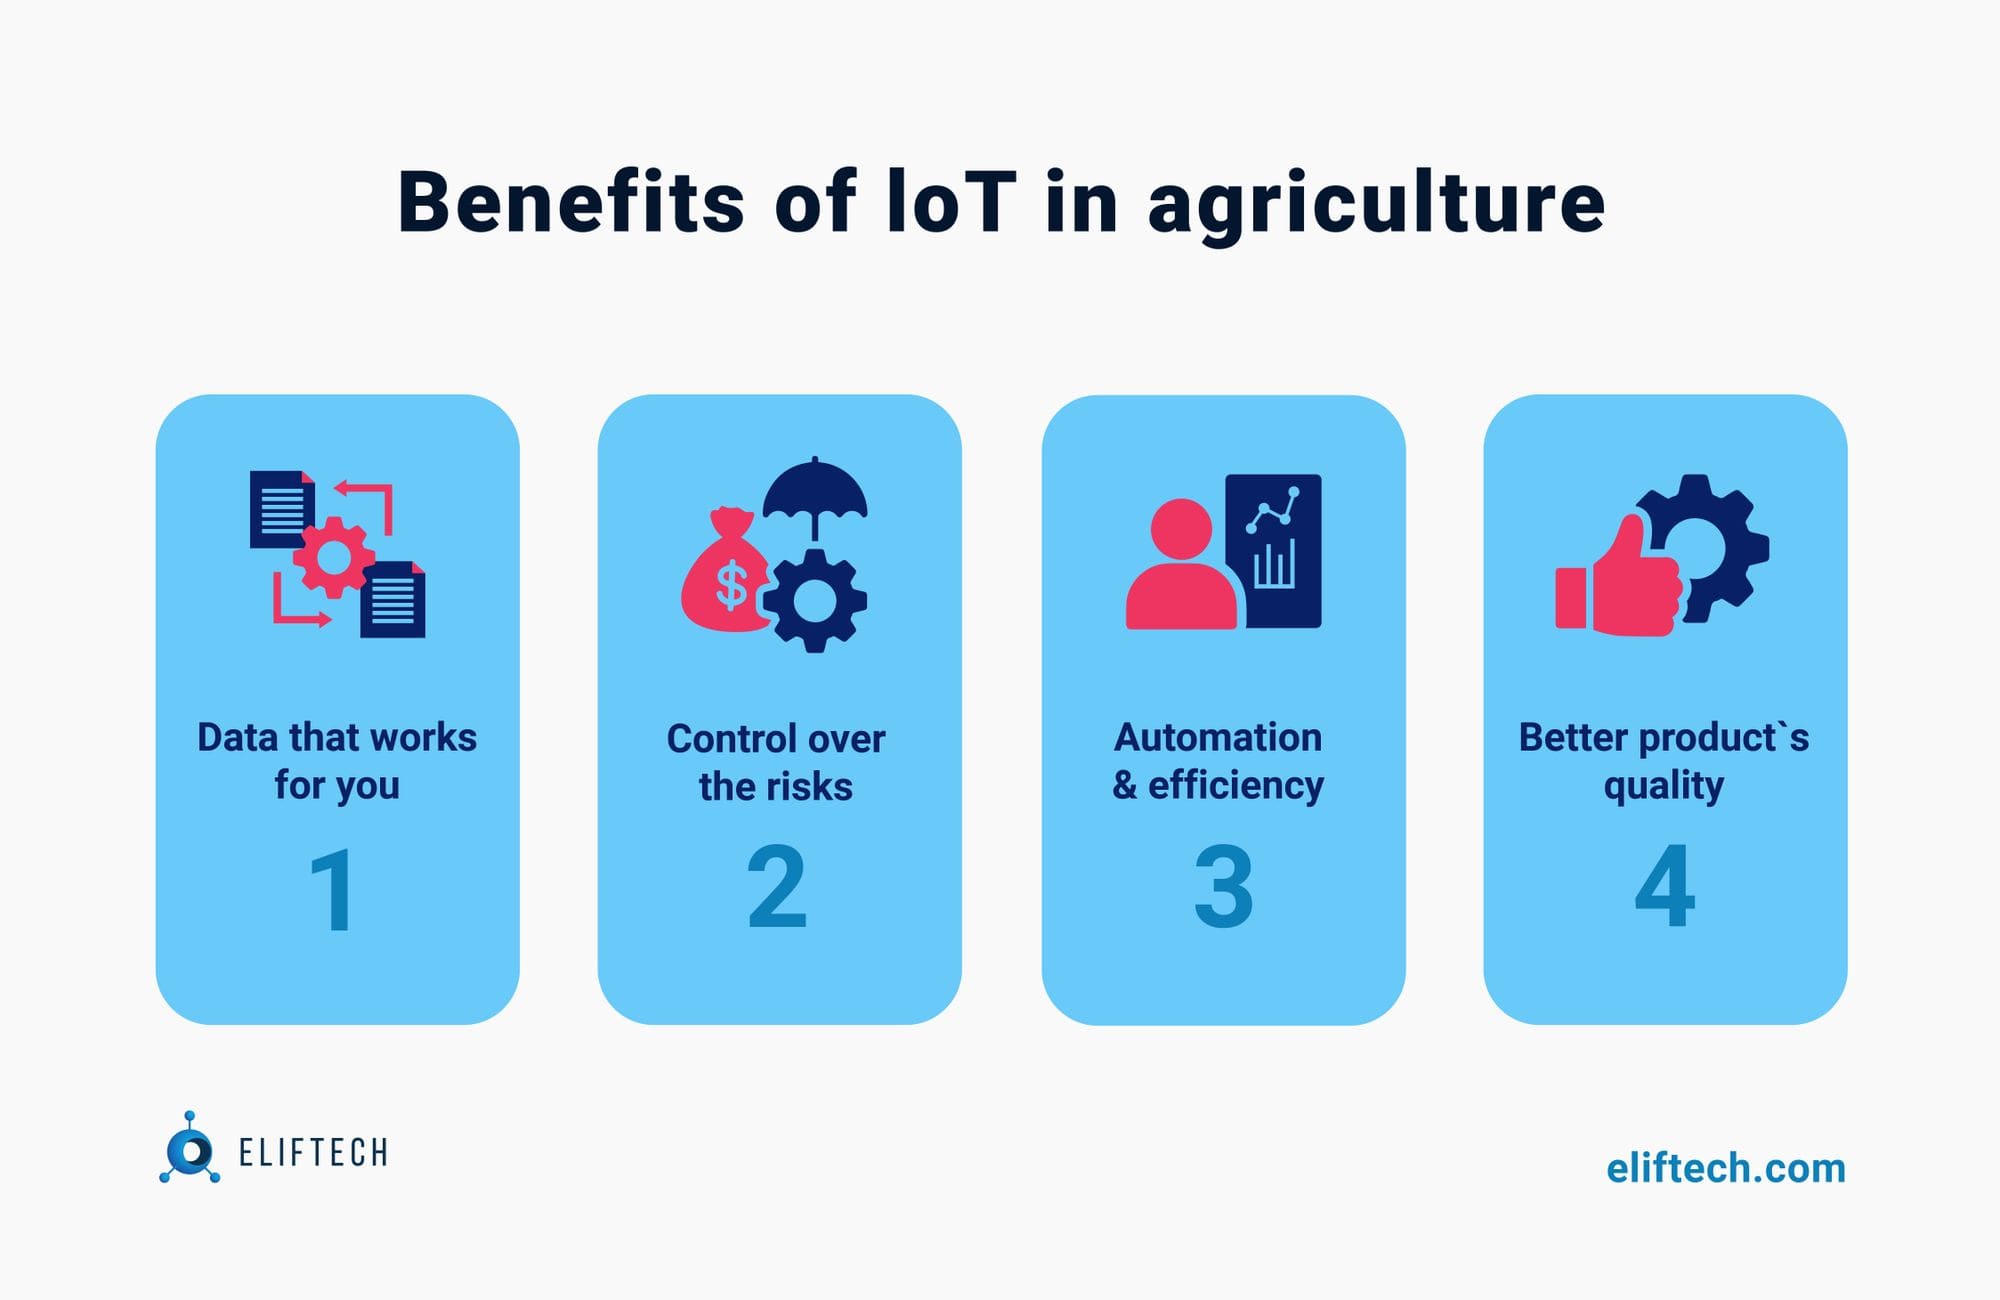 Benefirs of IoT in Agriculture